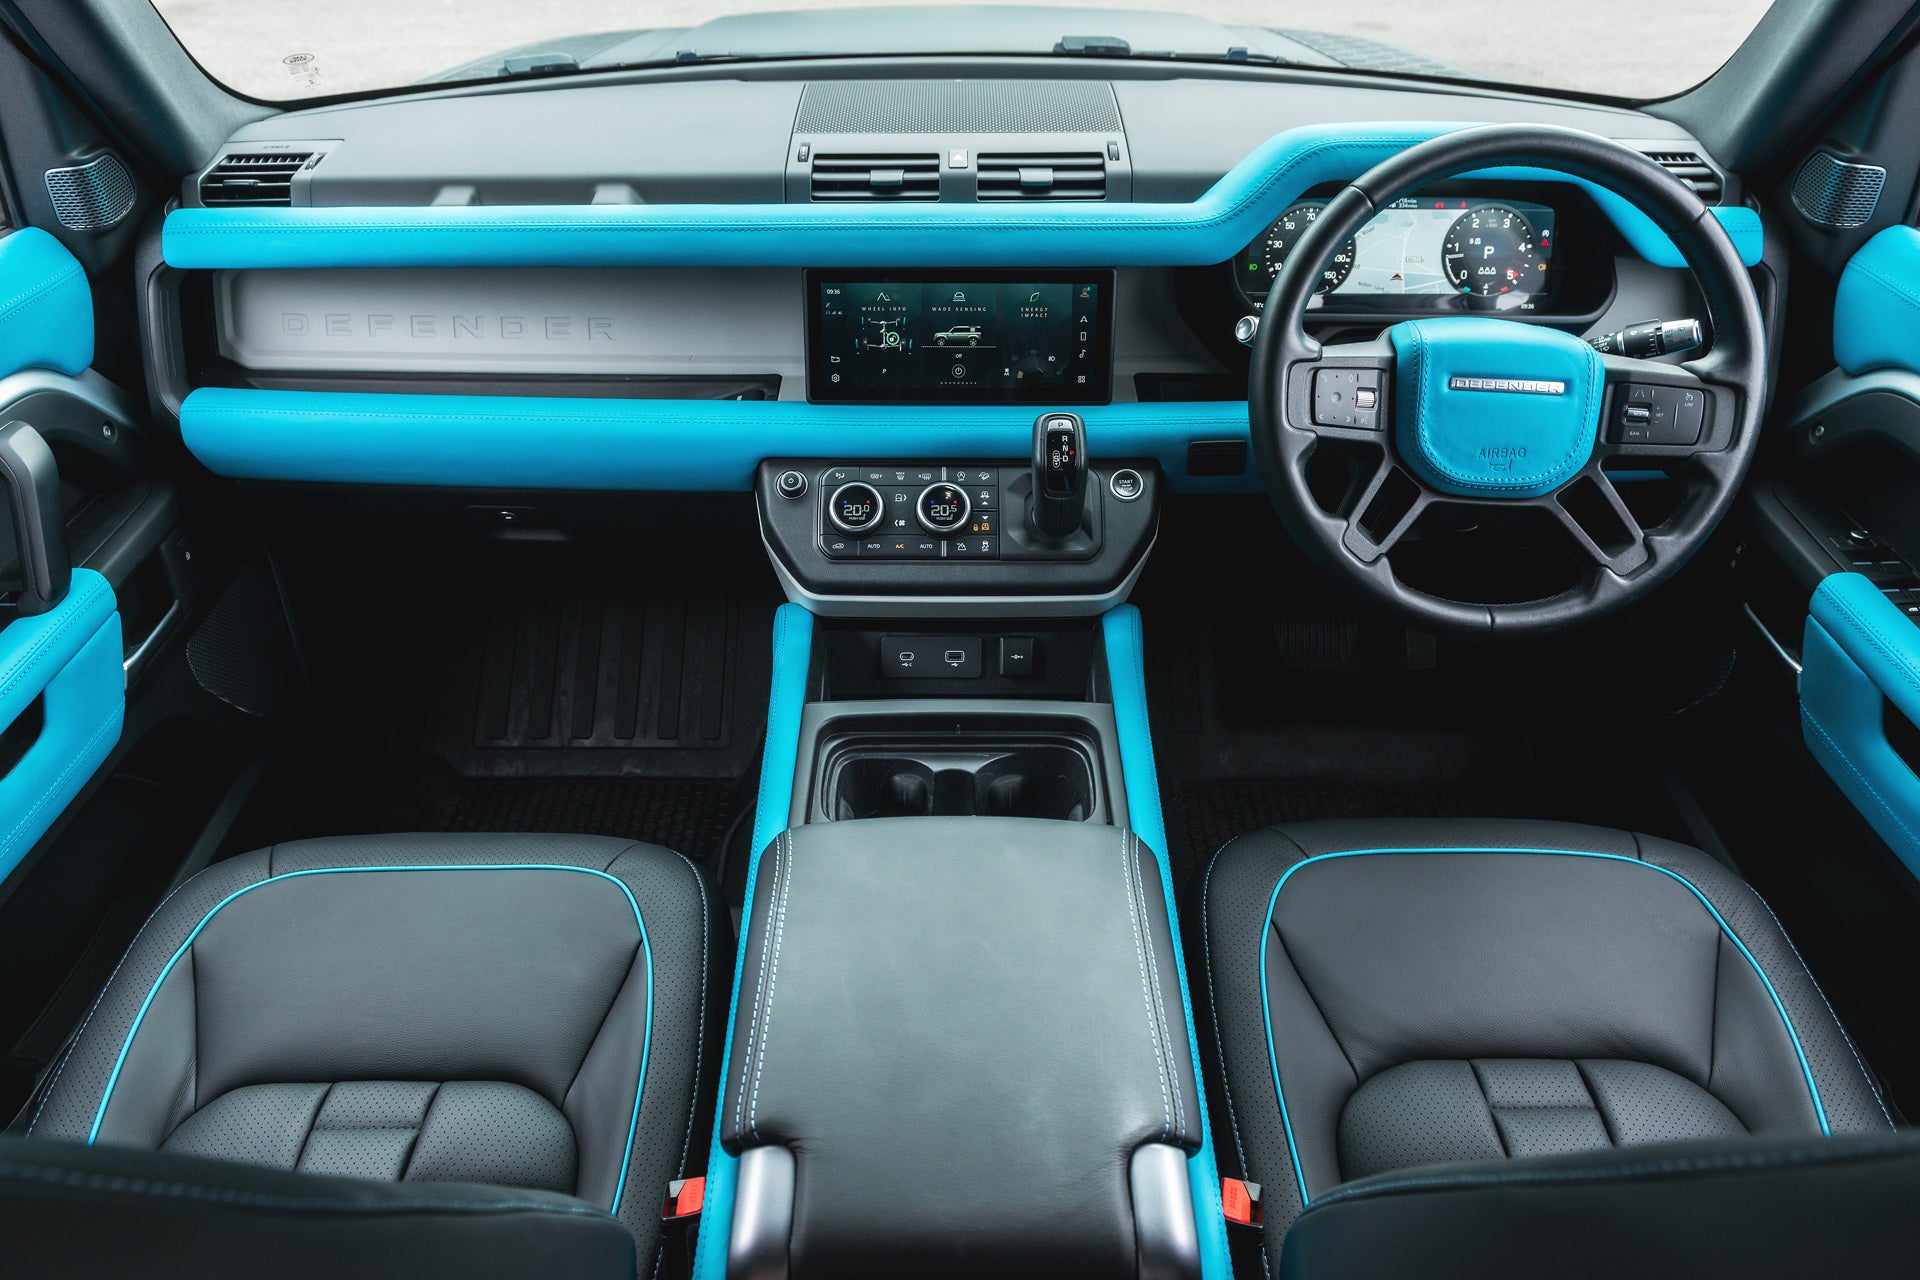 Tiffany-Inspired 3D Modular Leather Interior for Land Rover Defender